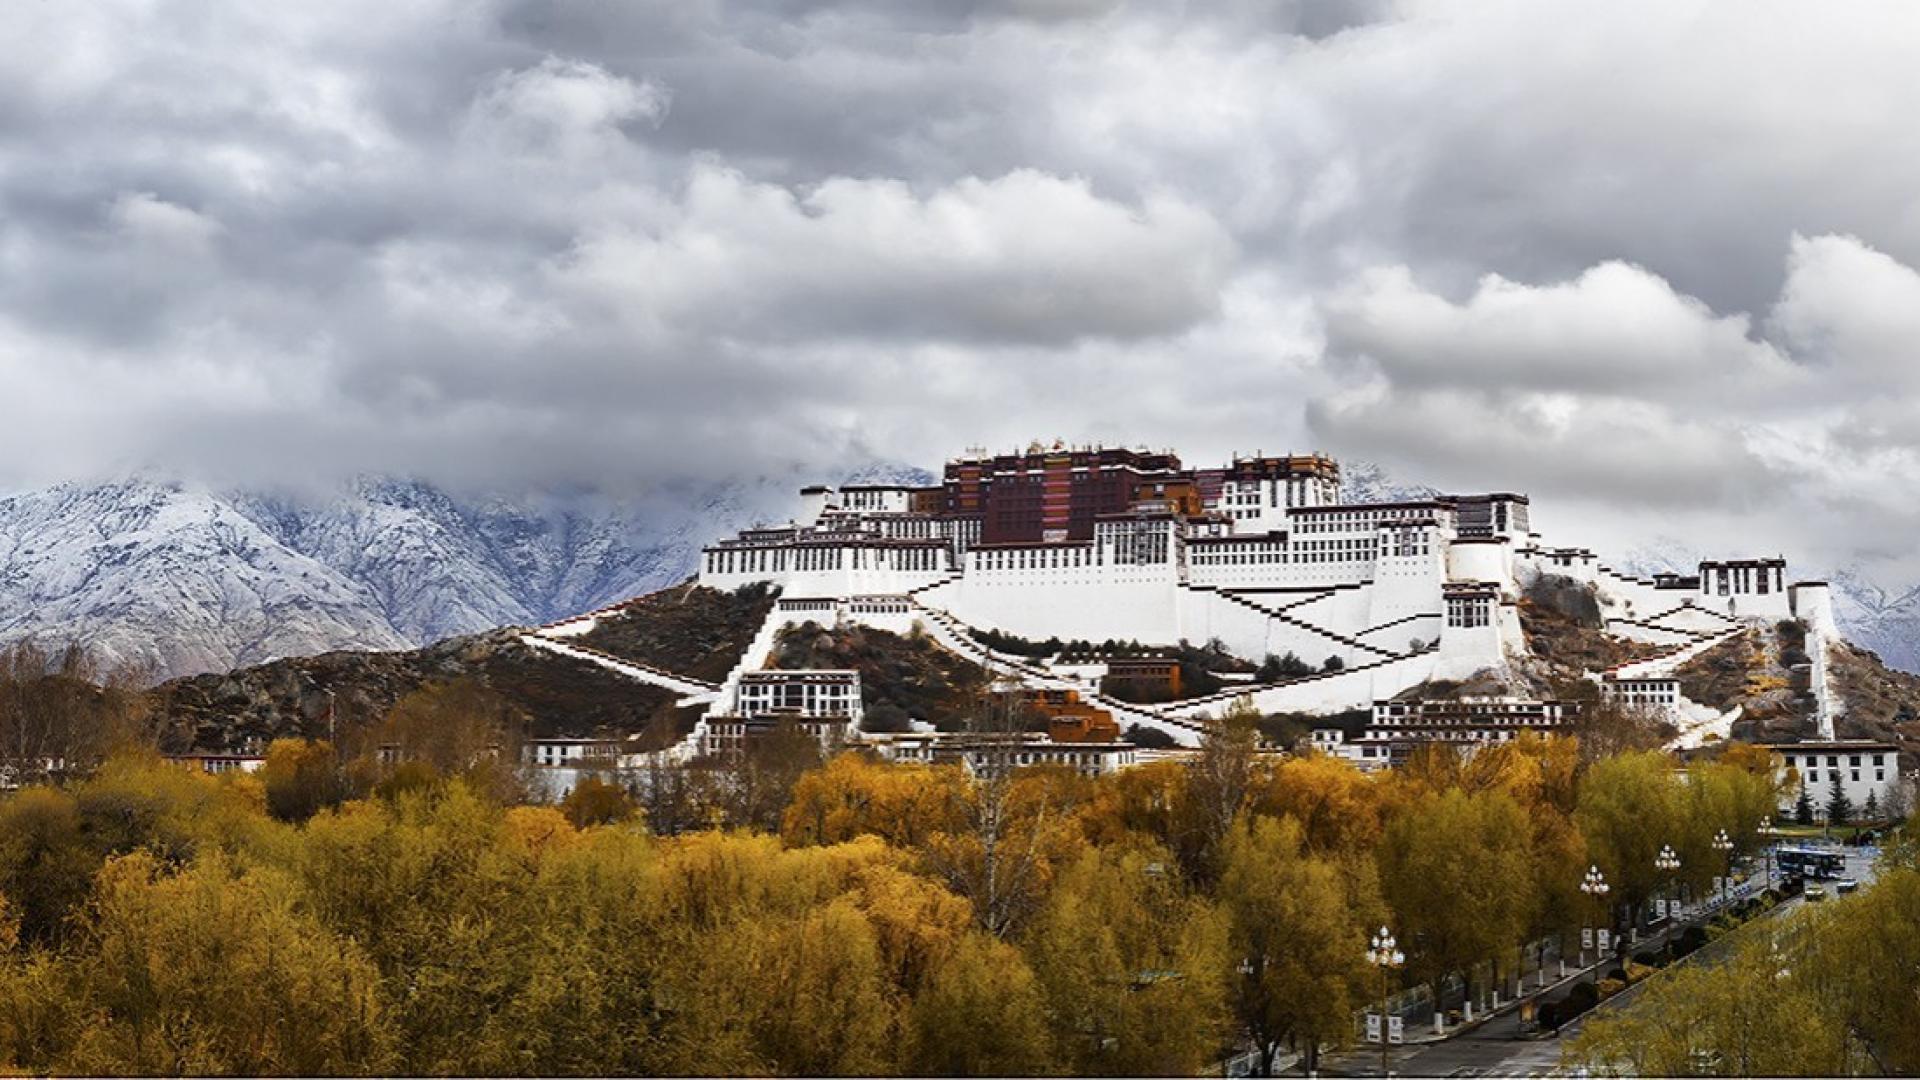 Tibet City Images for Background Wallpaper 1920x1080